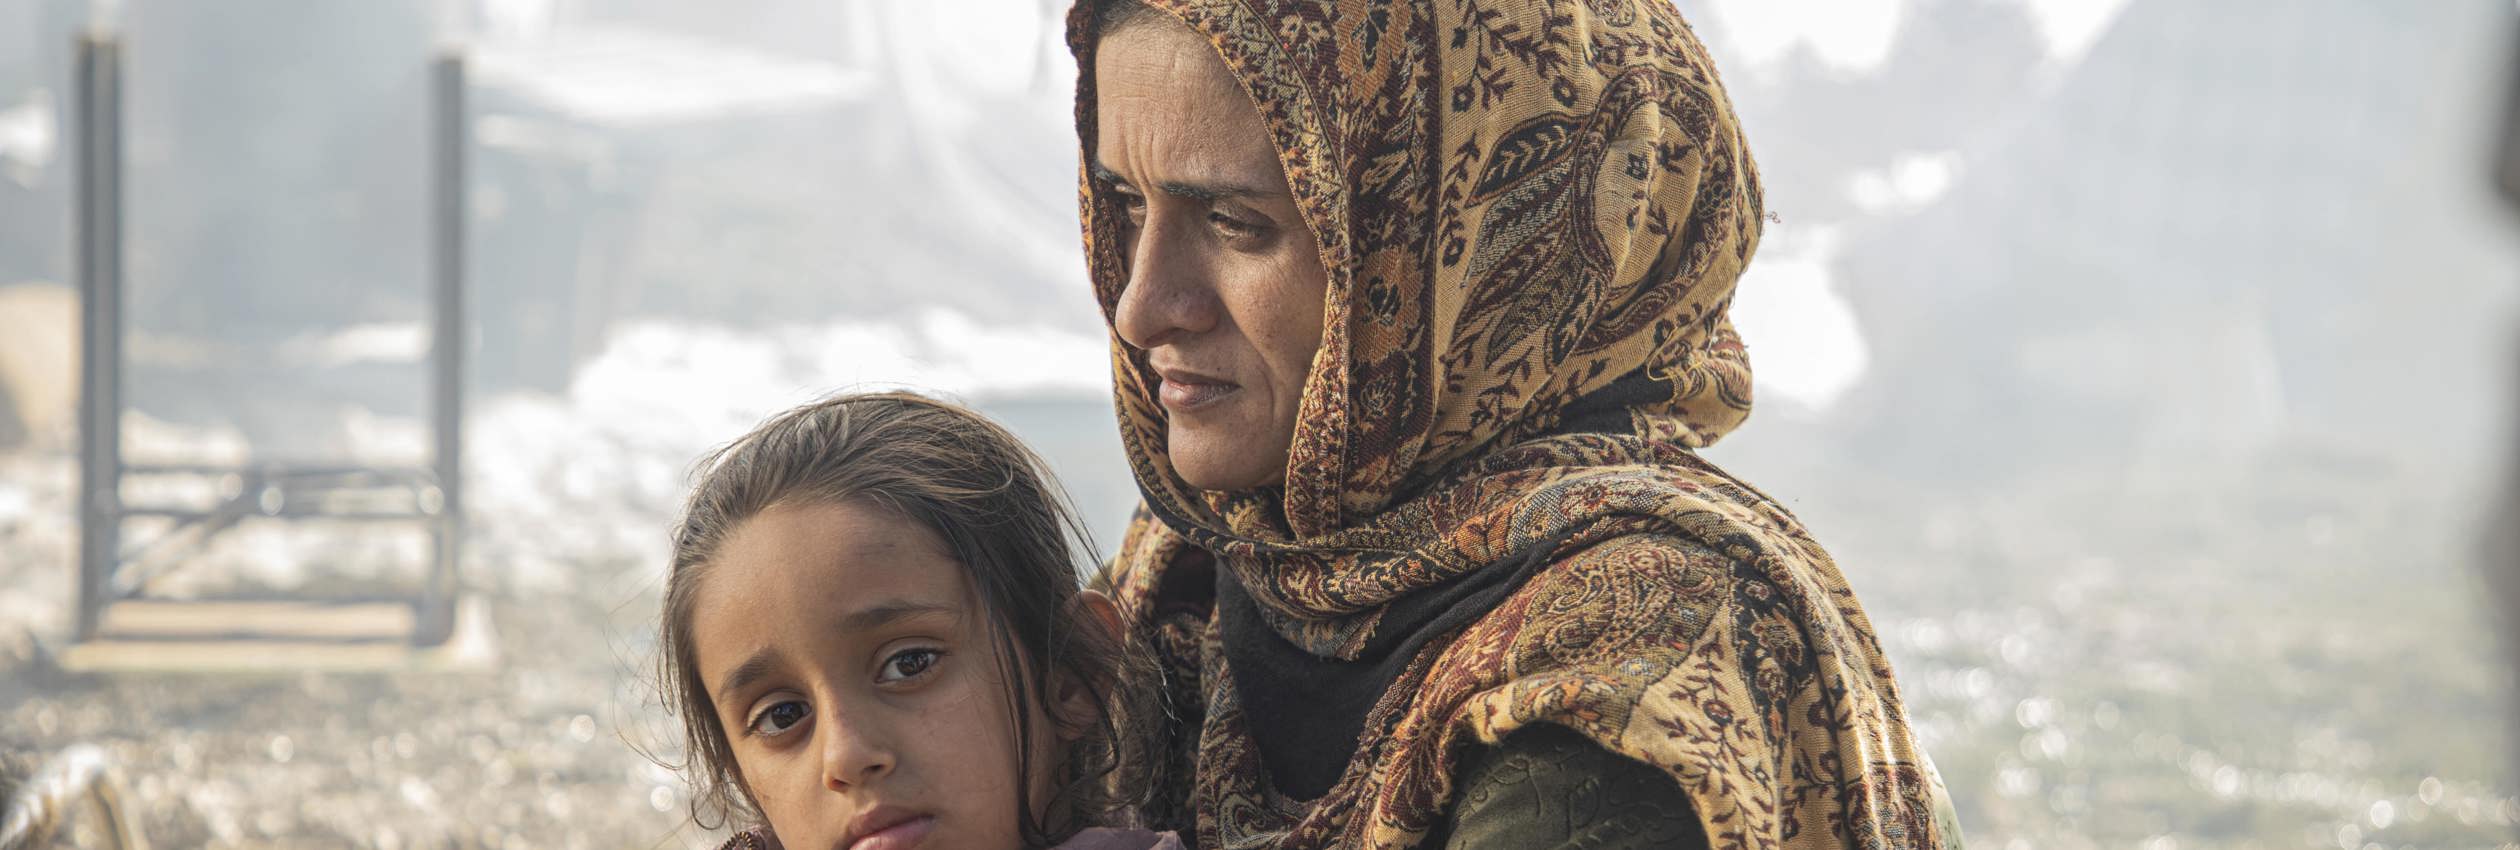 A refugee mother and daughter sit against a backdrop of rubble.